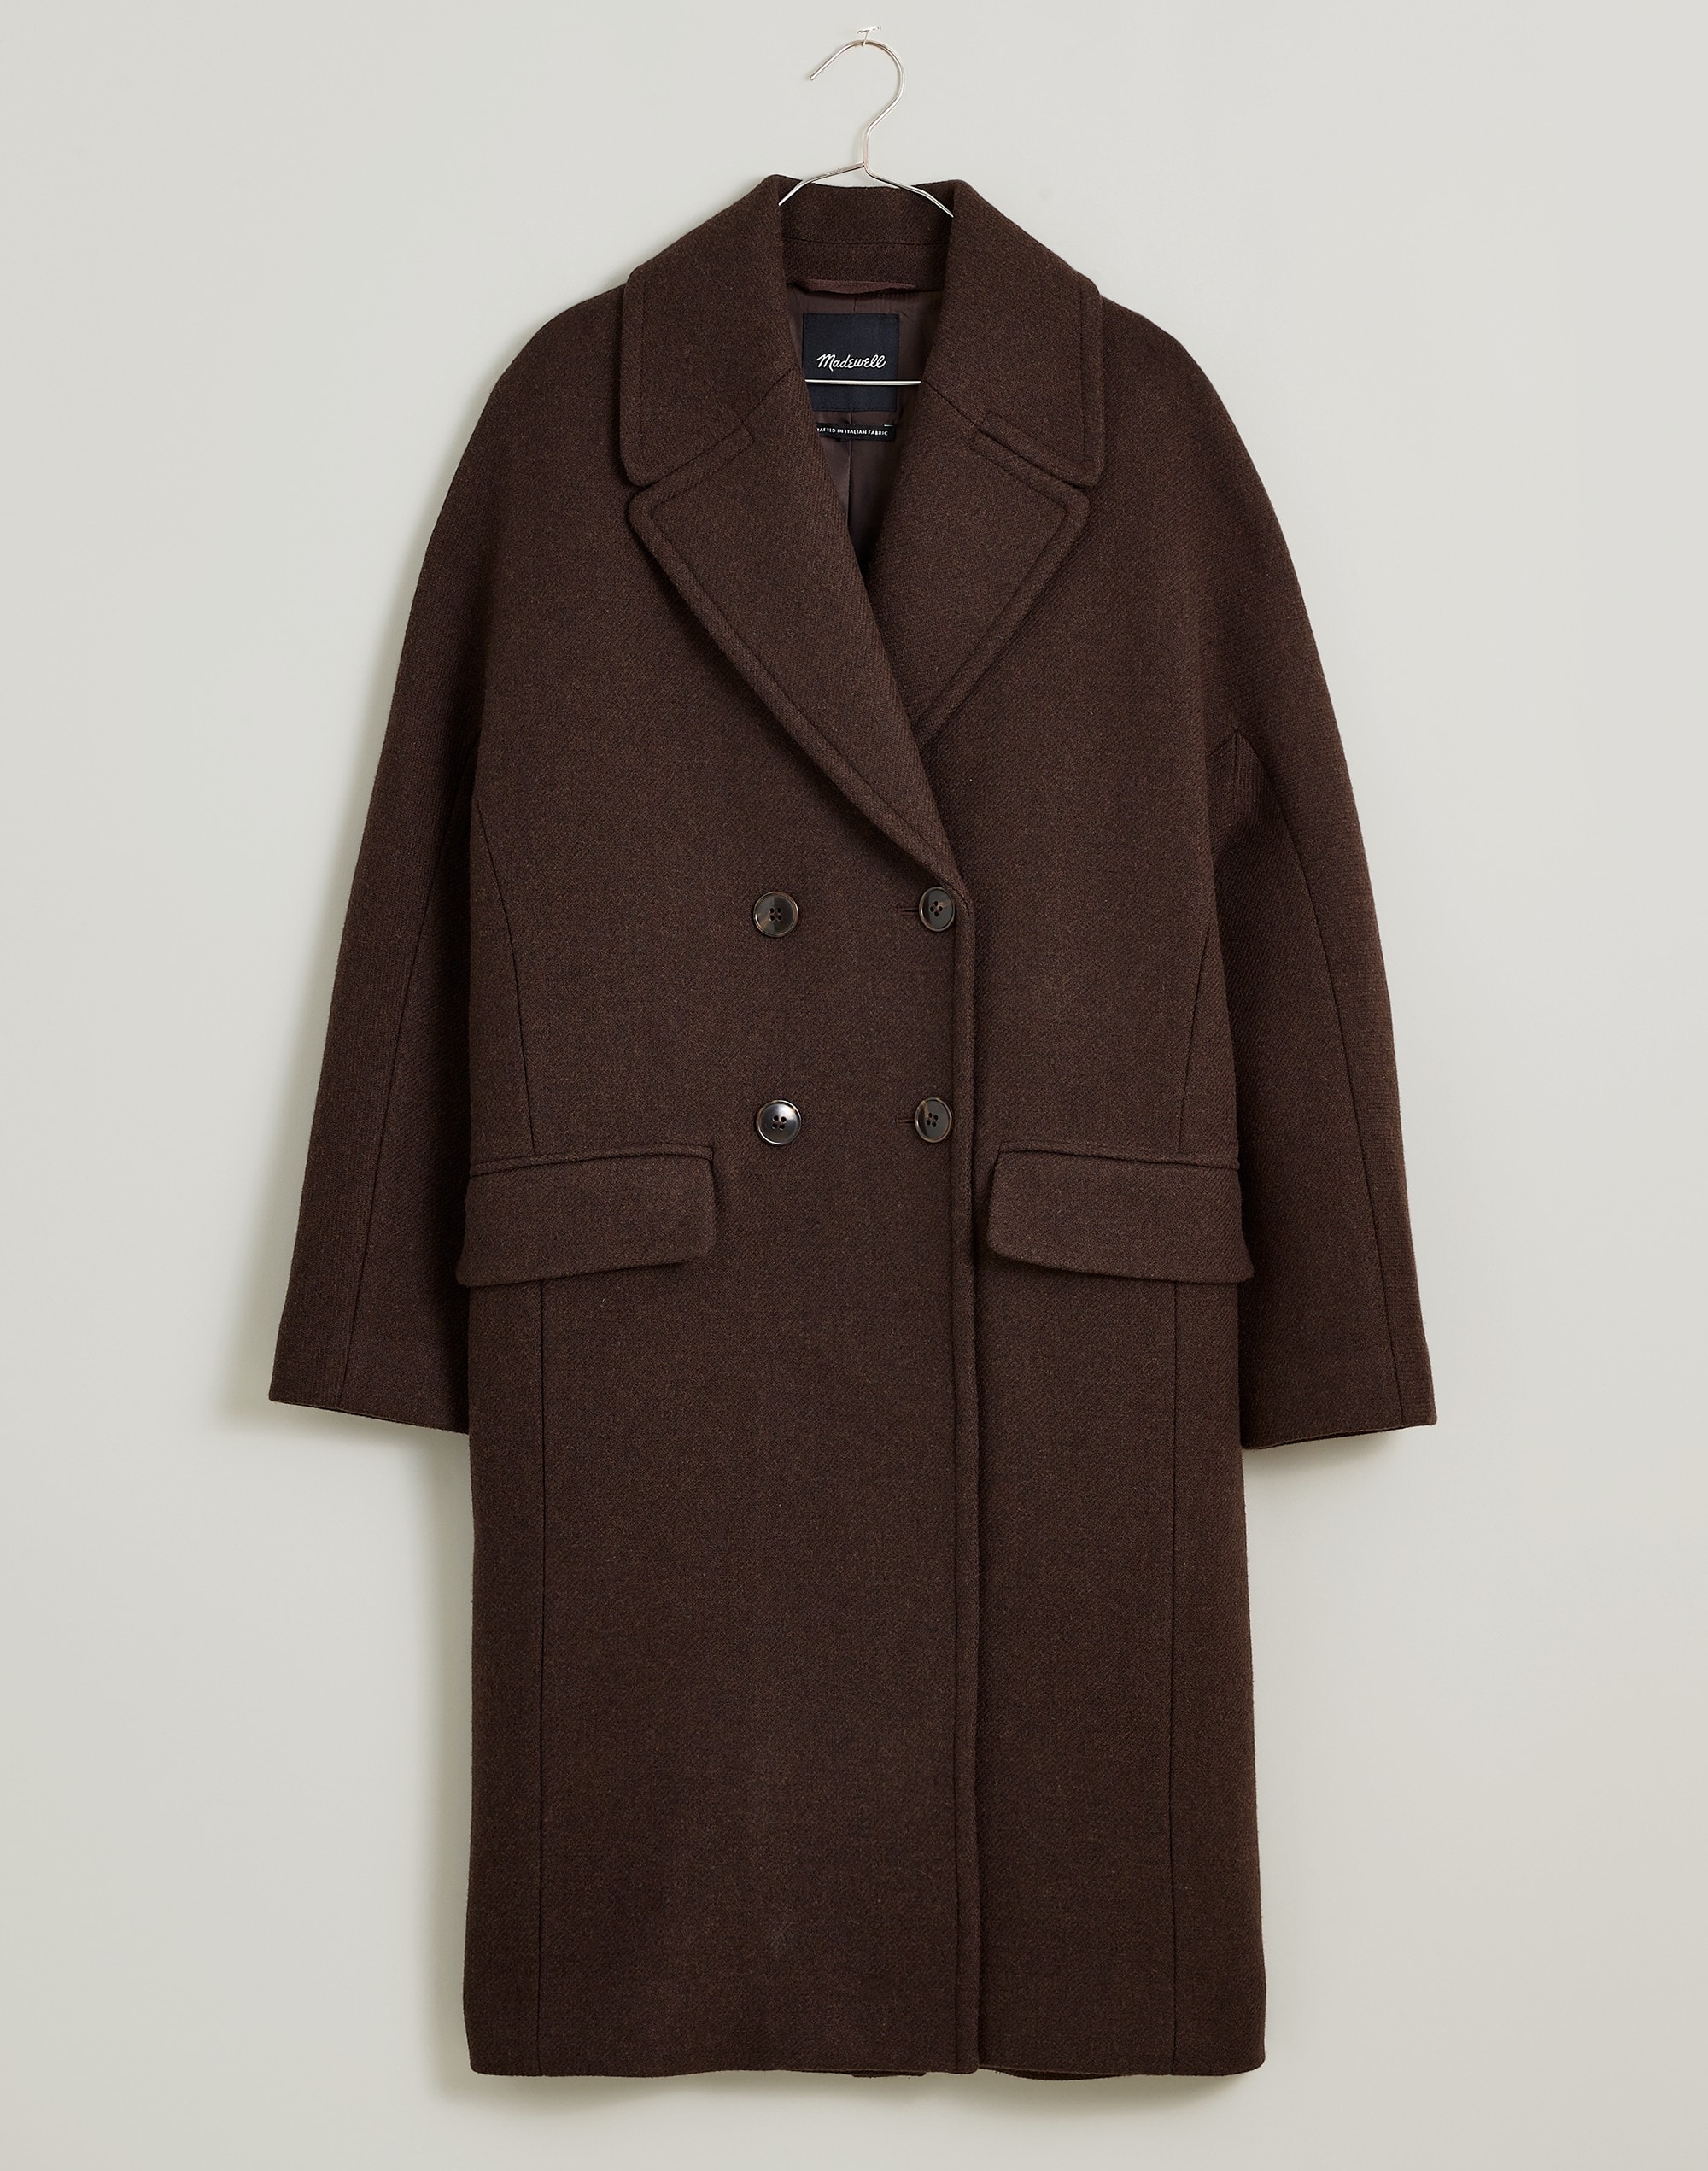 The Gianna Coat in Insuluxe Fabric